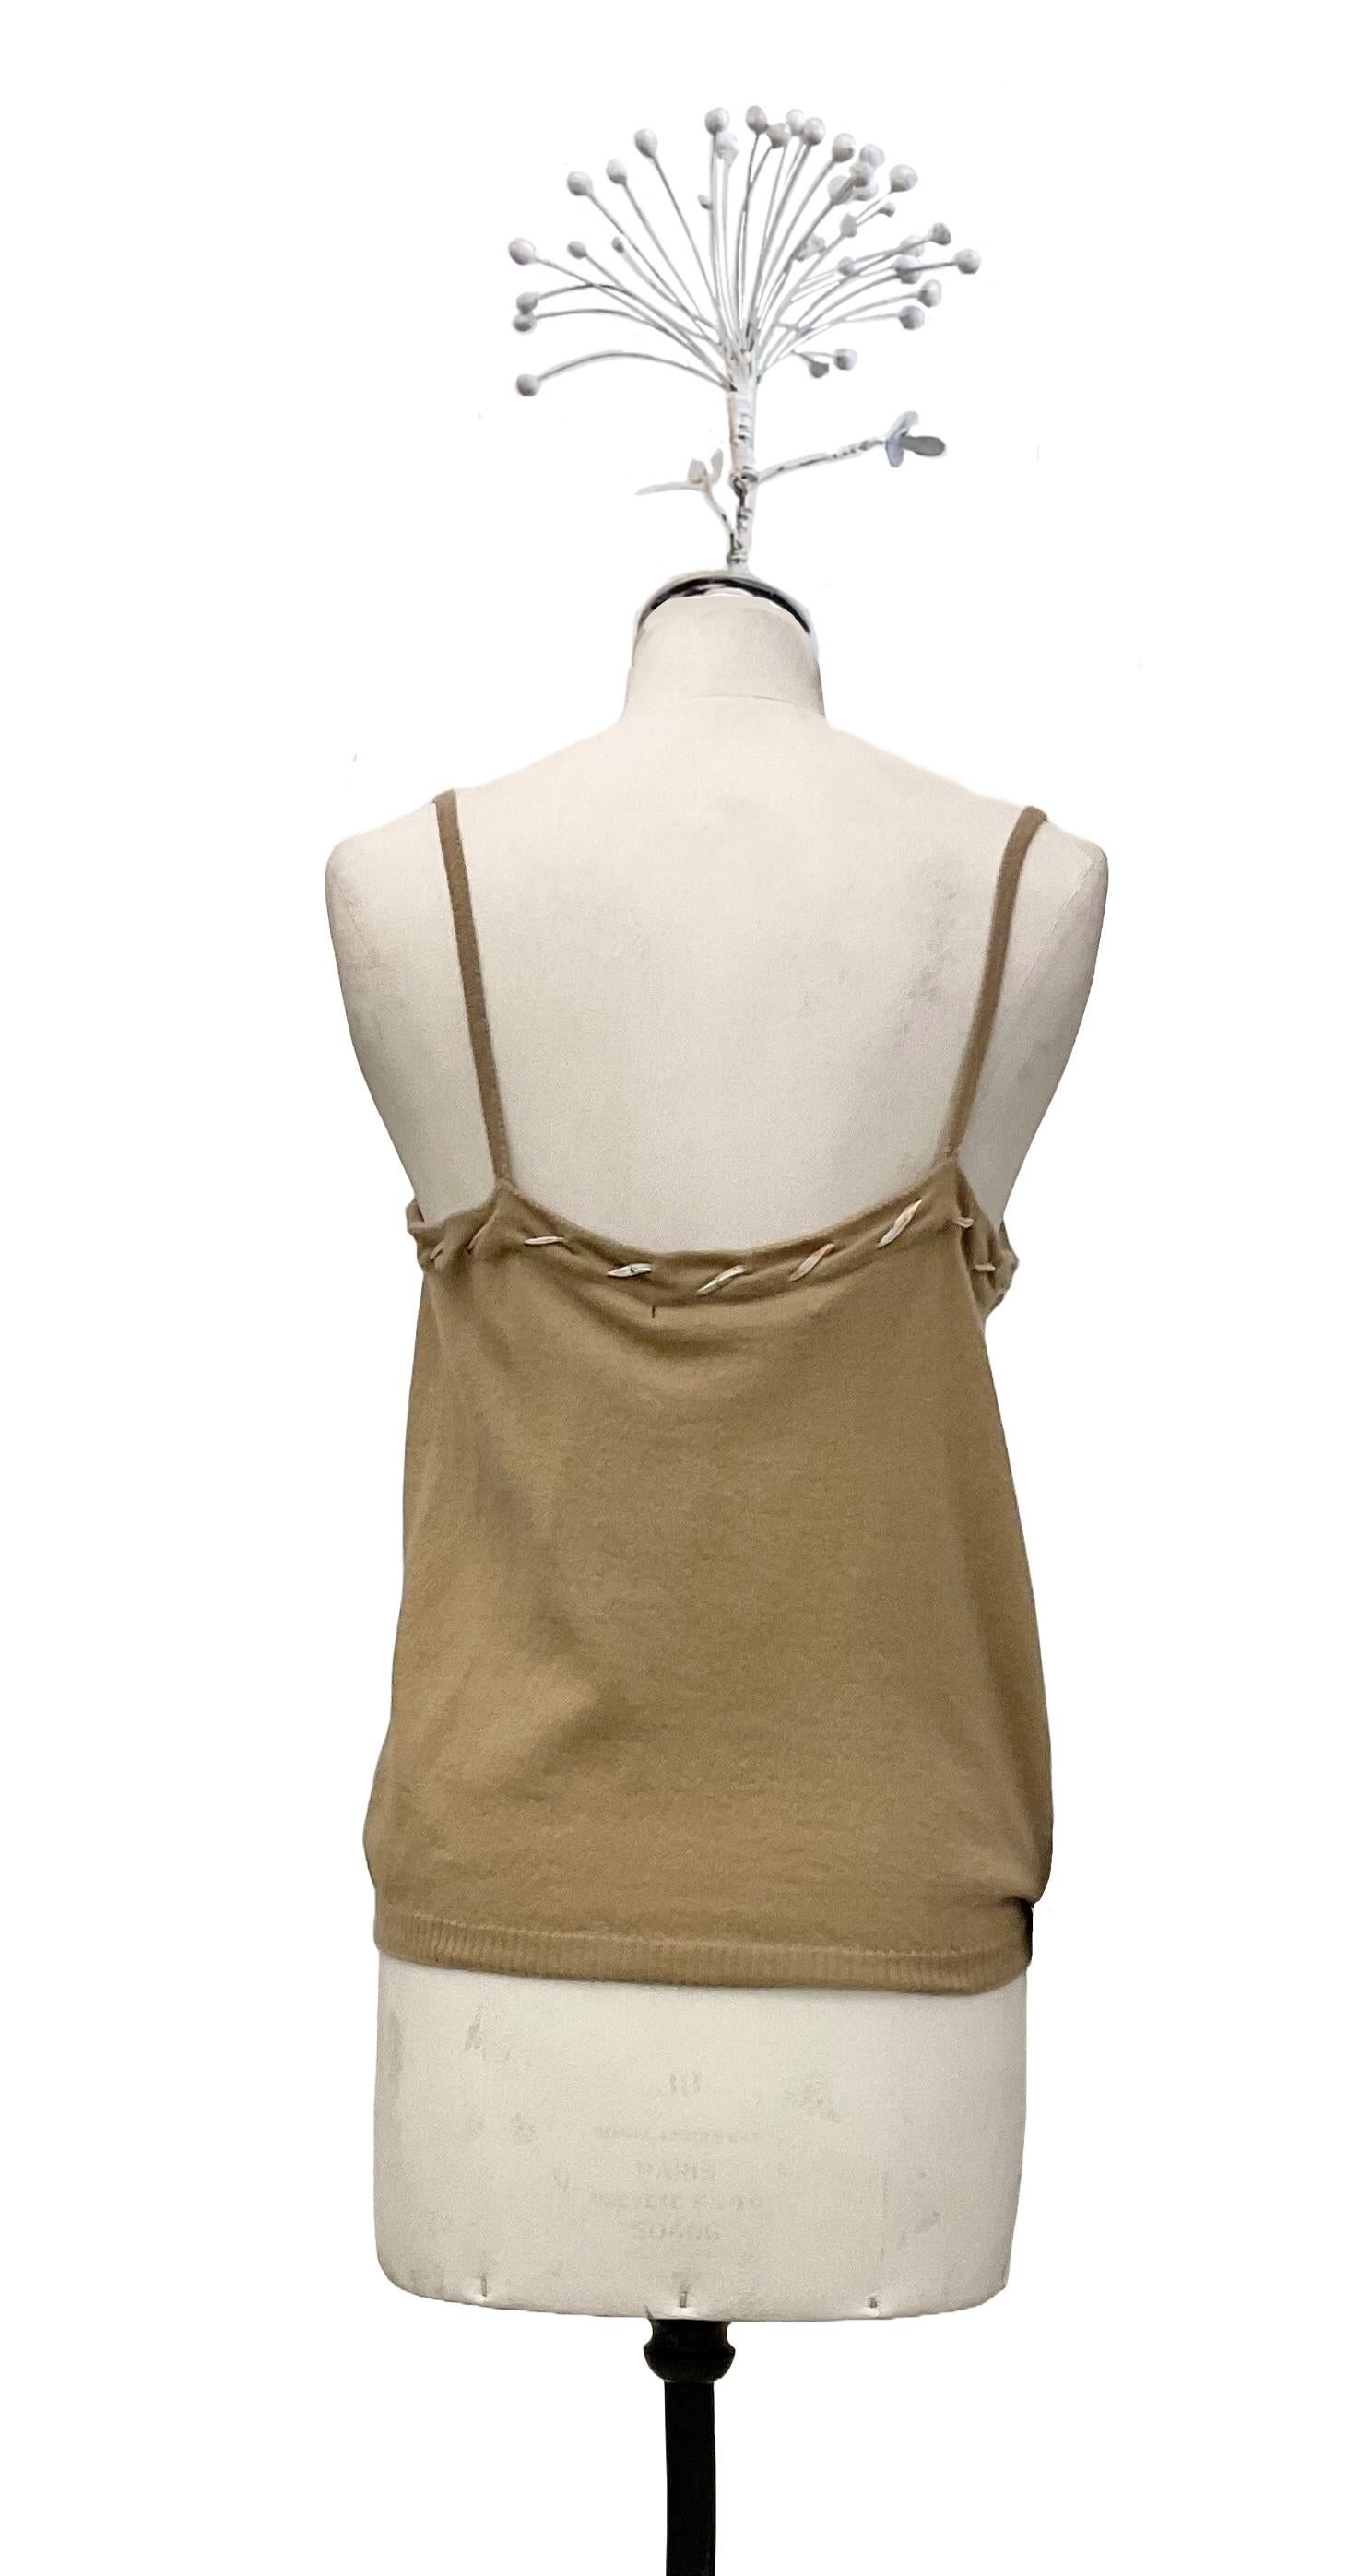 Wool knit top - angora by John Galliano from the collection
Ready to Wear Fall Winter 2005.
The top has a slip neckline and thin straps.
A printed silk organza ribbon decorates the neckline.
The color is beige and the composition is 70% wool and 30%